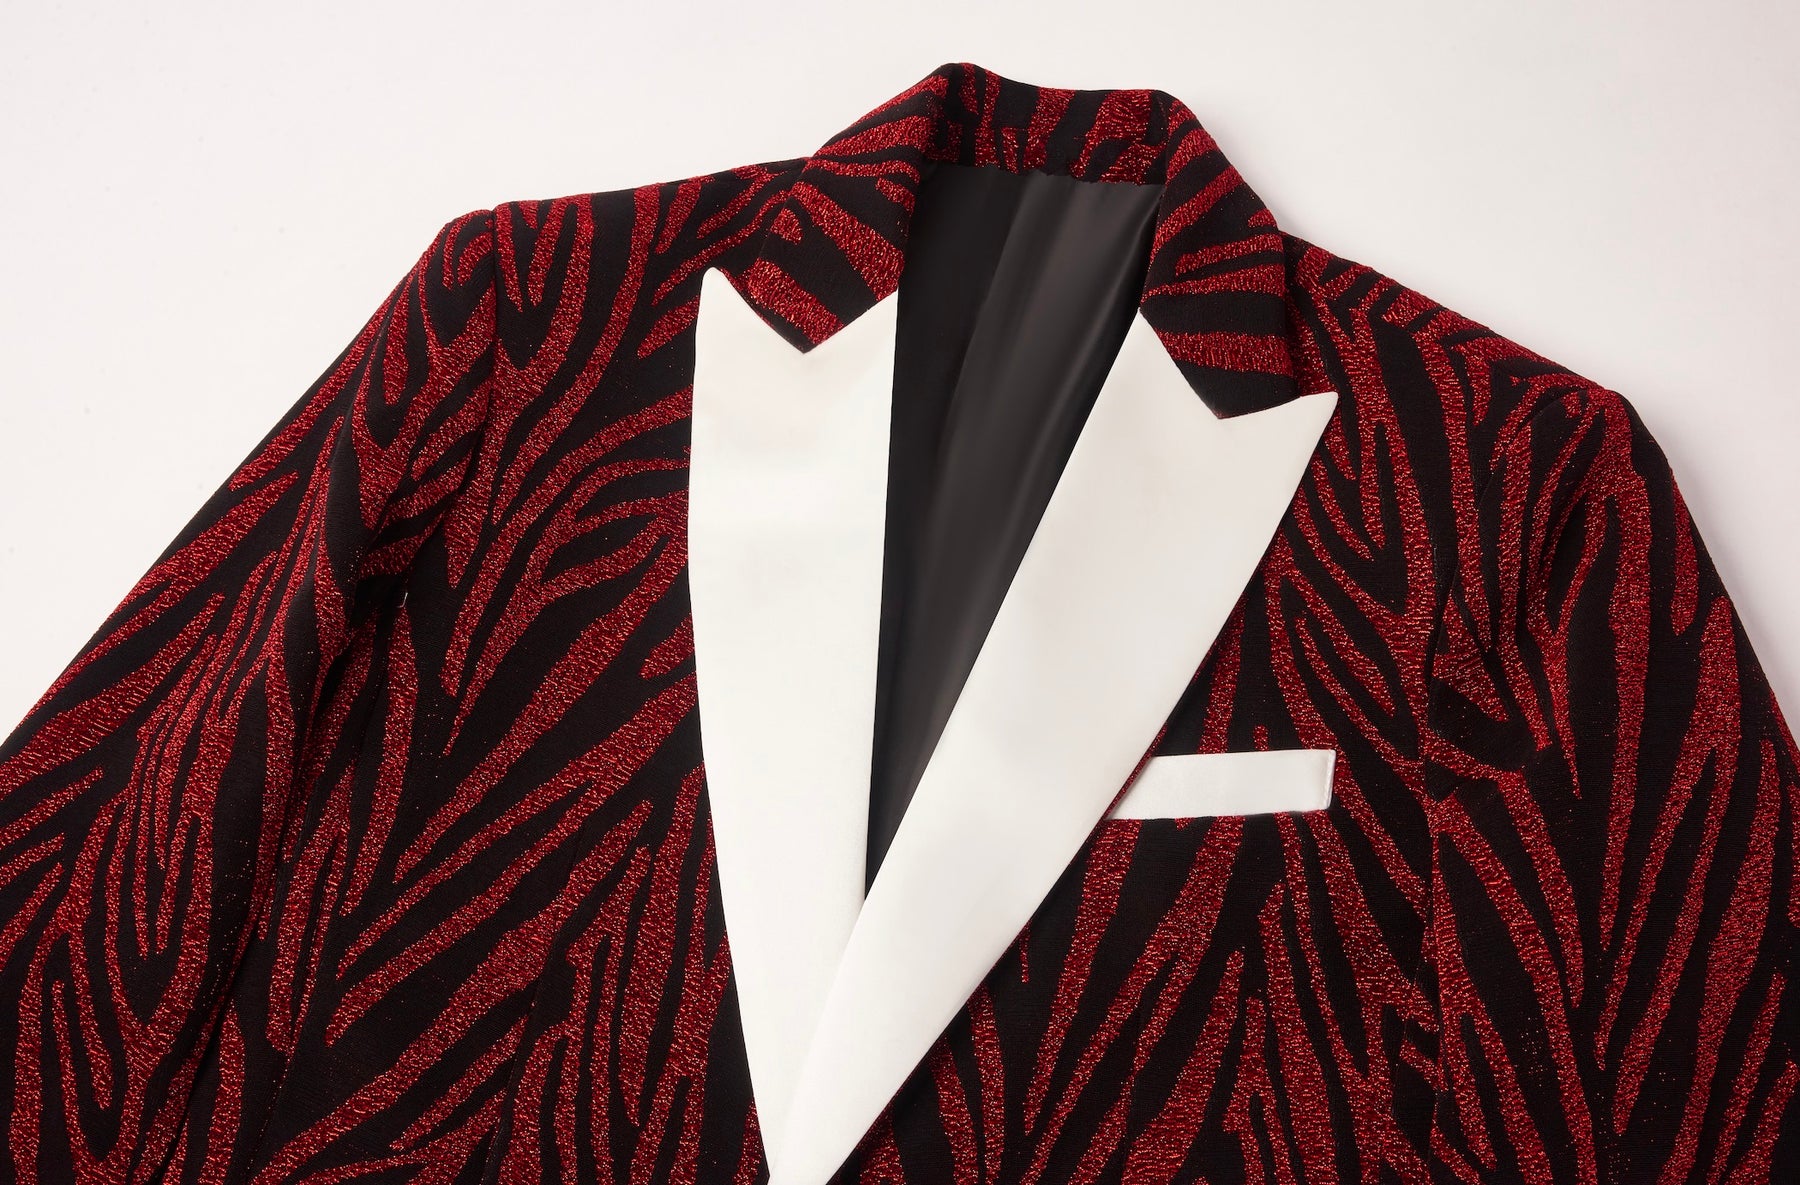 Abstract Print Red & Black Tuxedo M8077